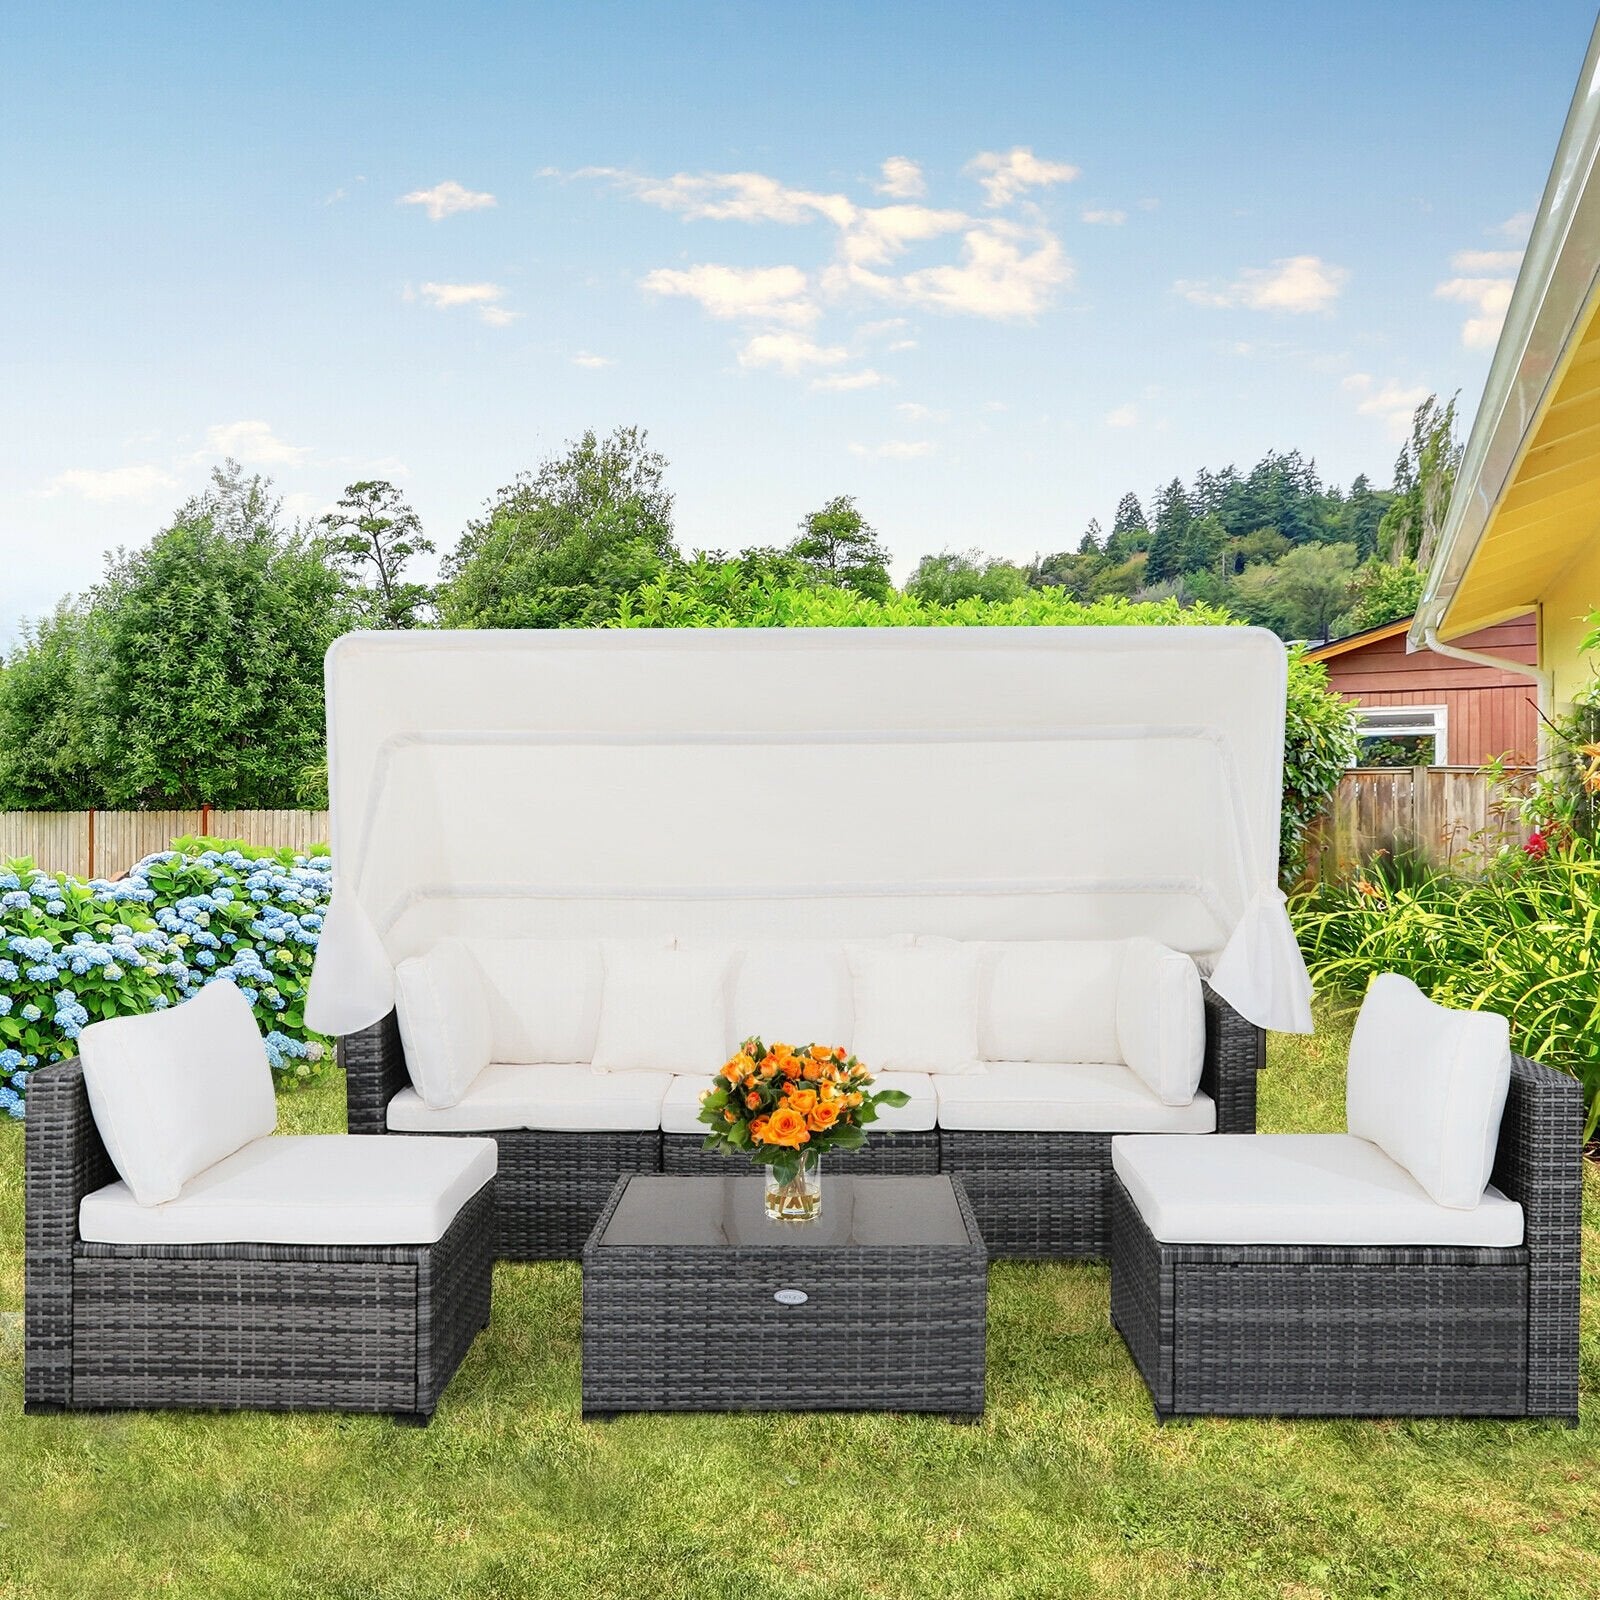 6 Pieces Patio Rattan Furniture Set with Retractable Canopy, Gray - Gallery Canada